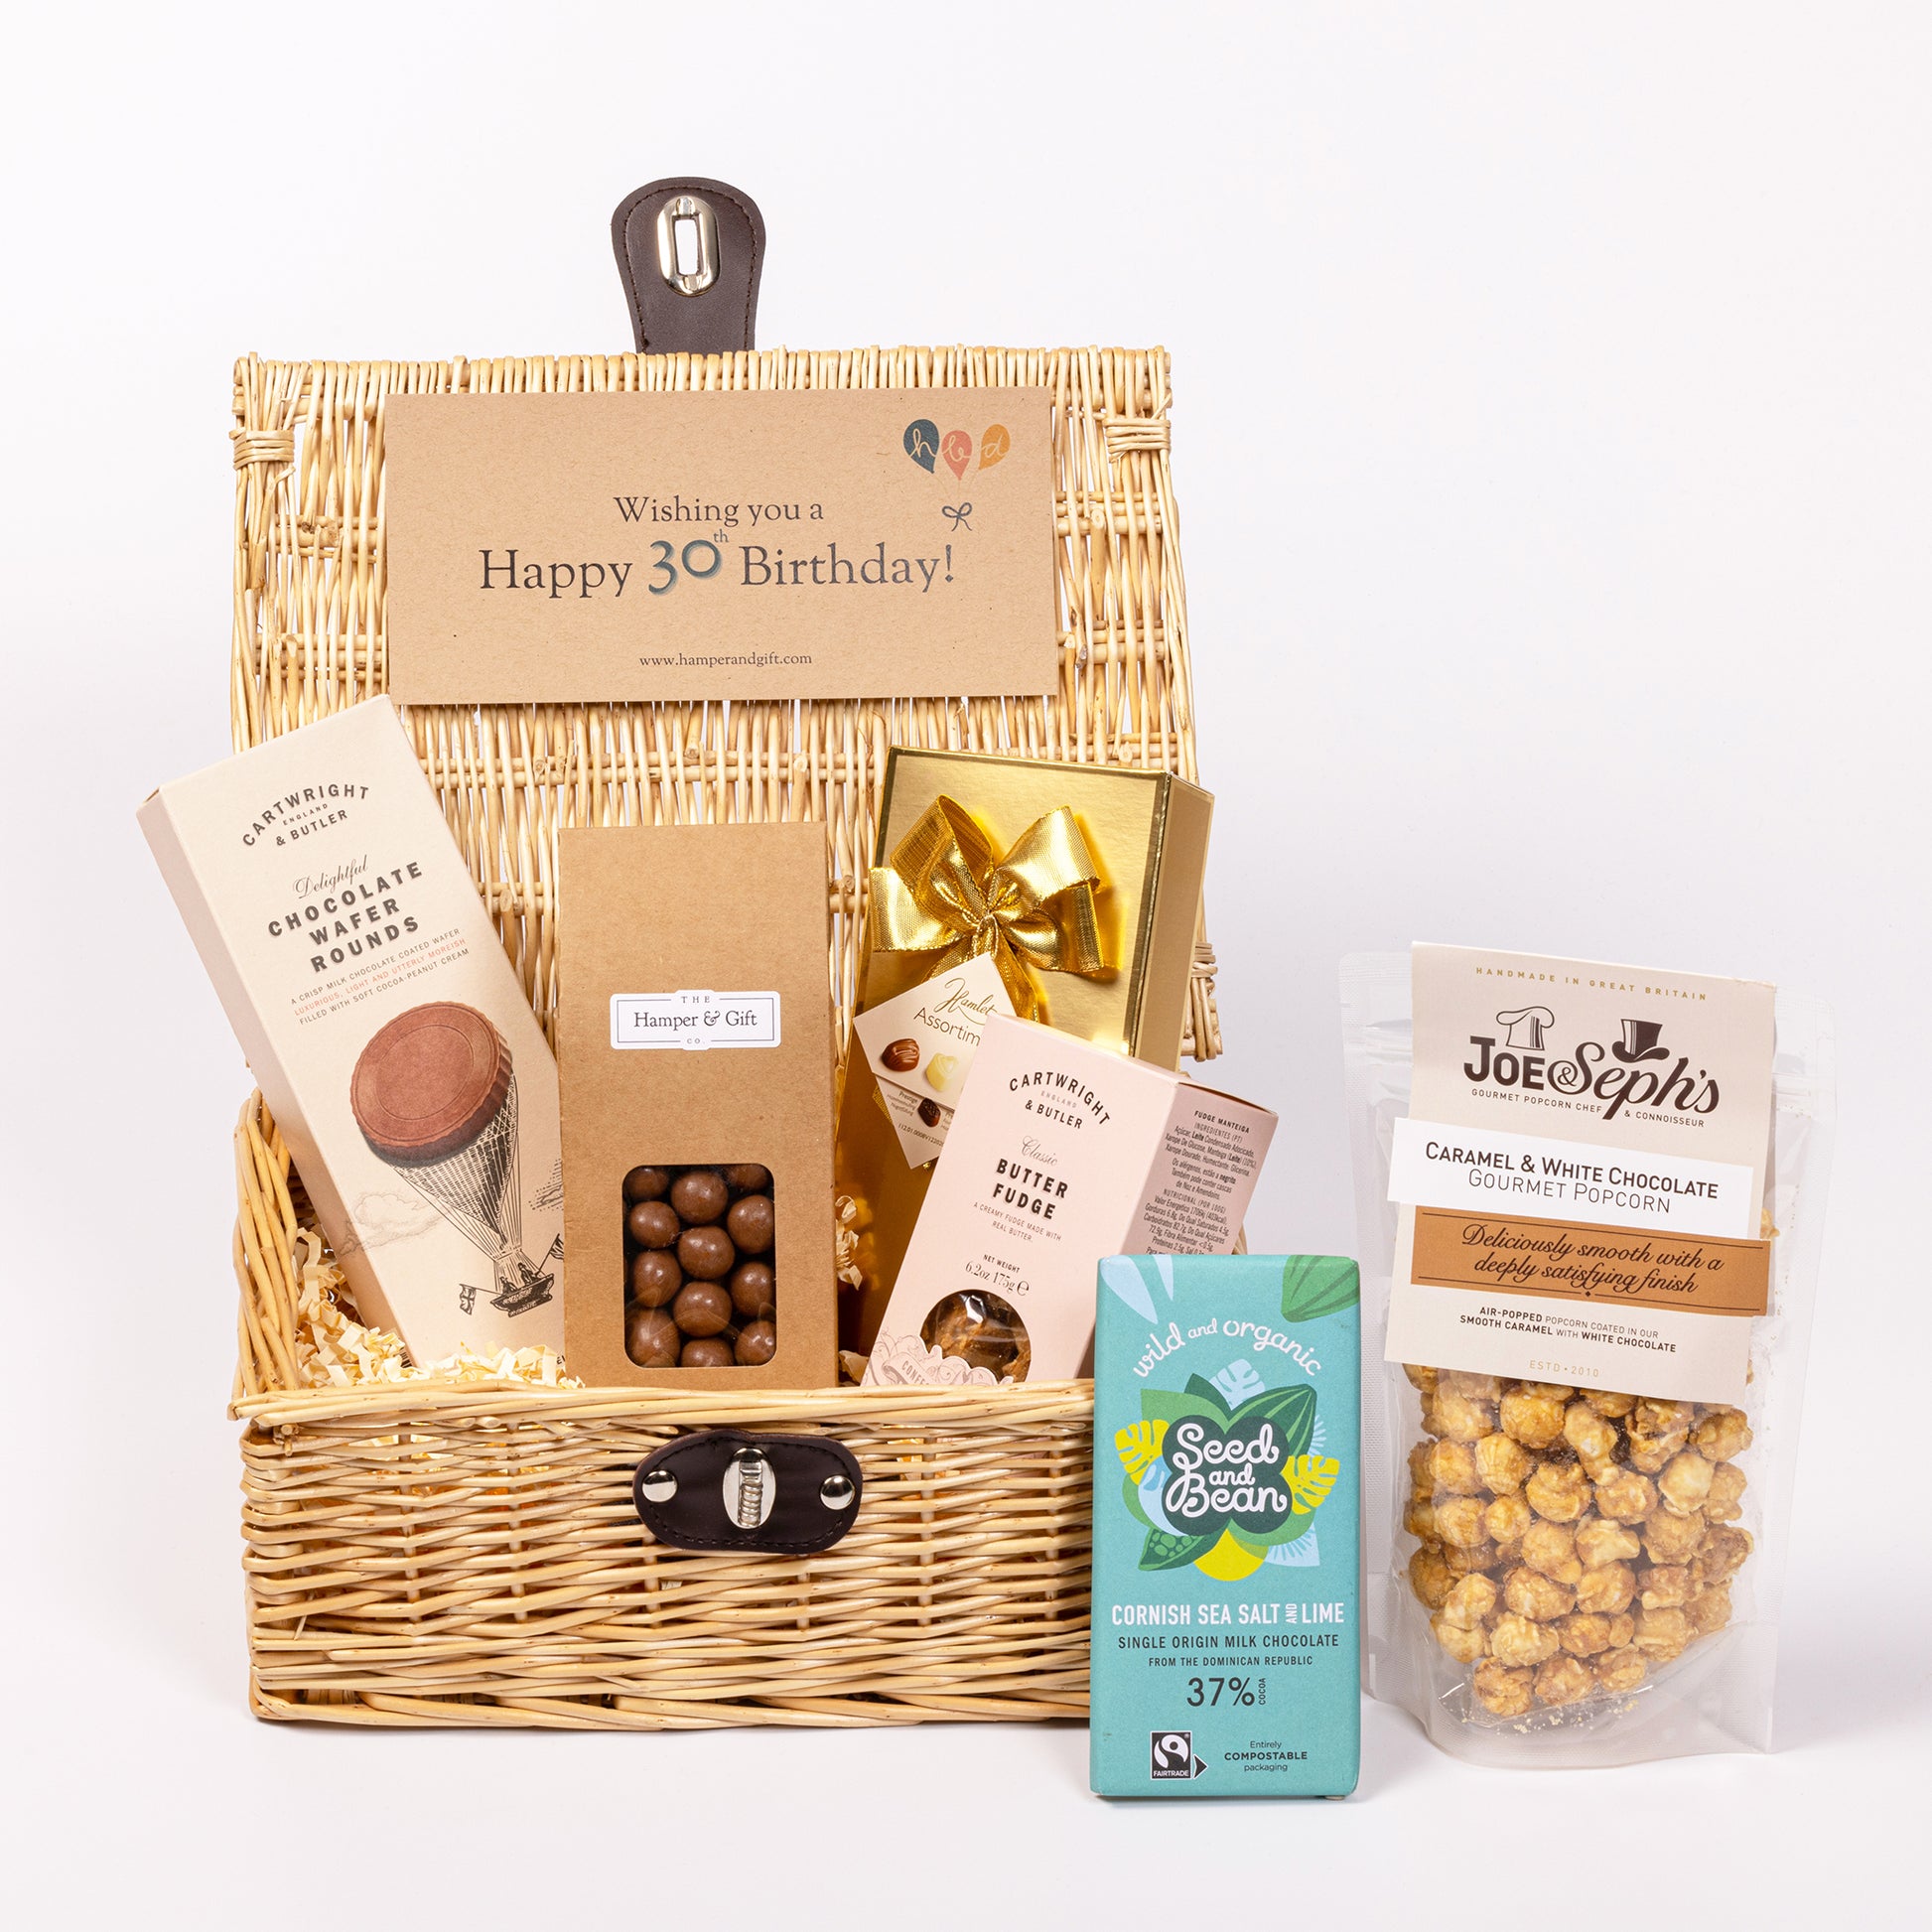 30th Birthday Chocolate & Fudge Hamper filled with a variety of chocolate, fudge, biscuit and gourmet popcorn